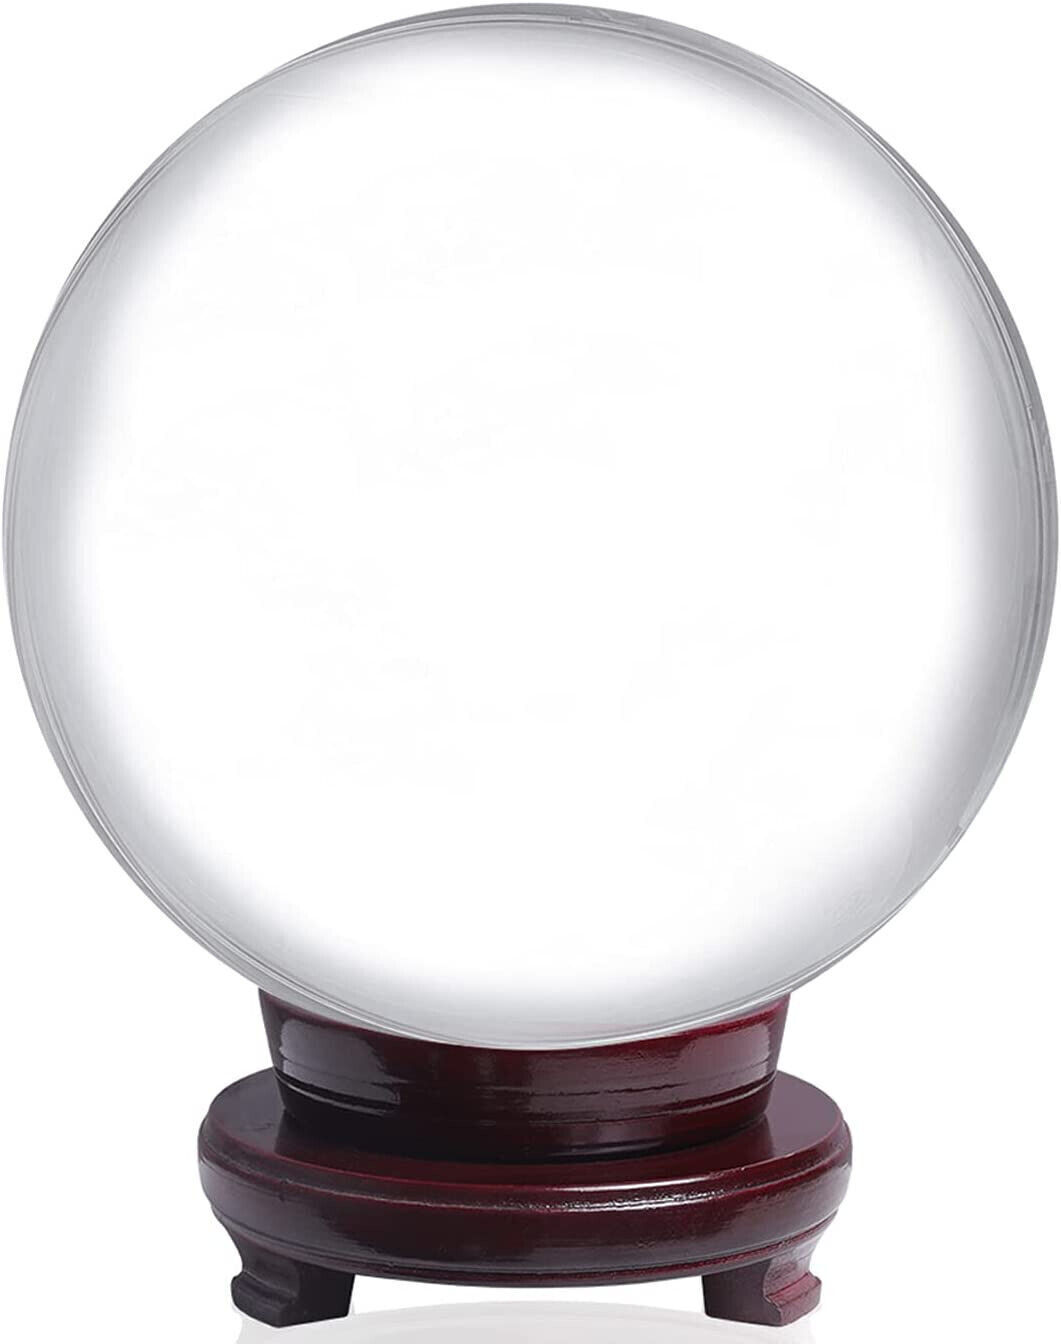 LONGWIN 200Mm(8 Inch) Huge Clear Divination Crystal Ball Meditation Glass Sphere